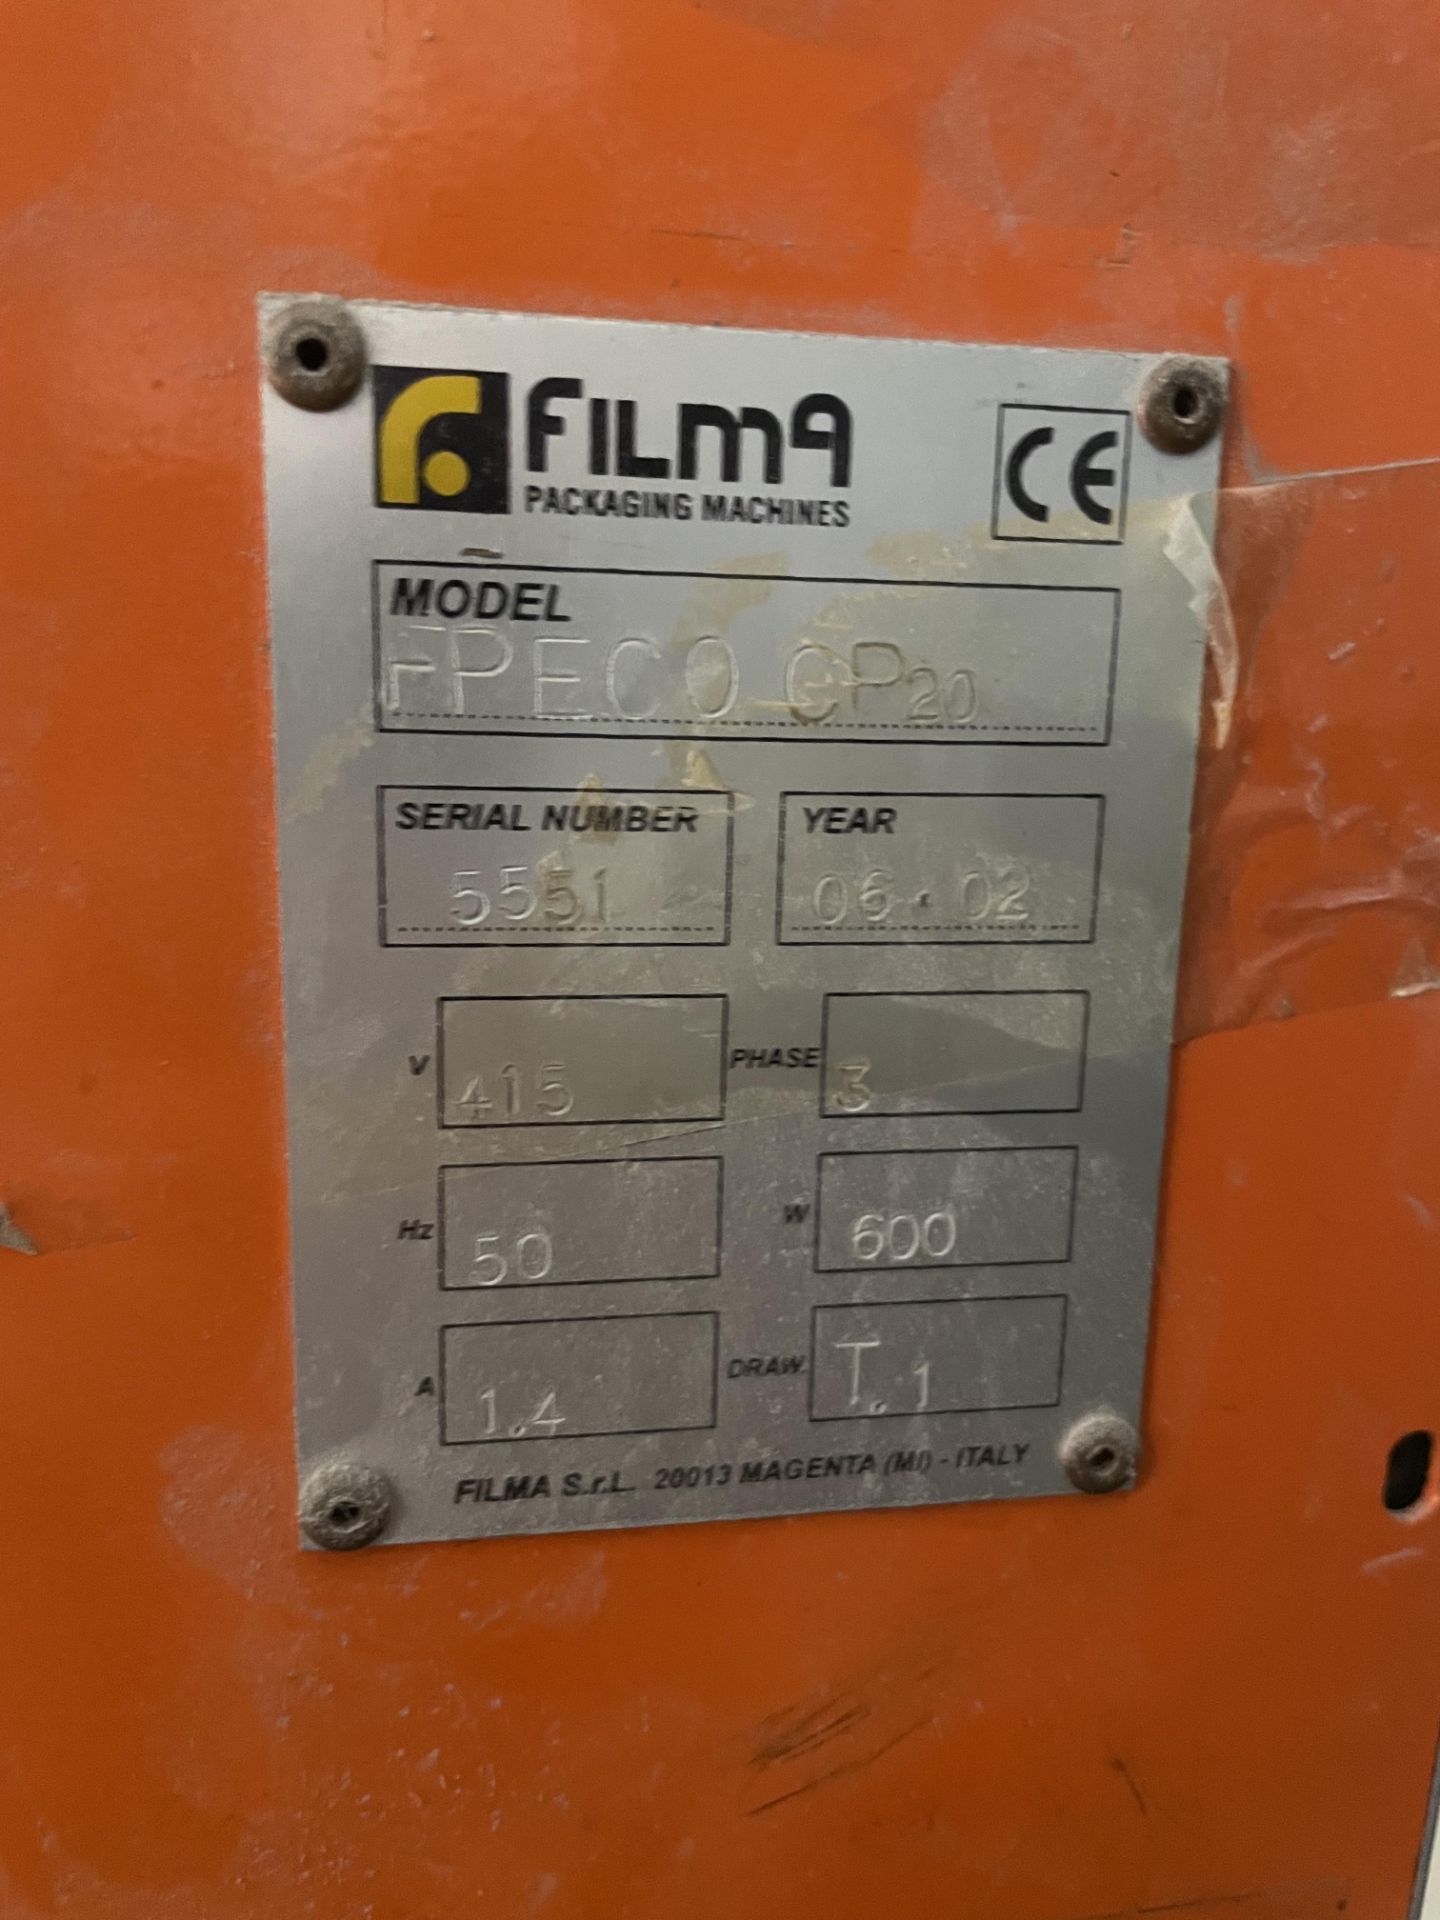 Film 9 FP ECO CP20 Rotary Pallet Wrapper, serial number 555 year of manufacture 2002, with 1480mm - Image 4 of 4